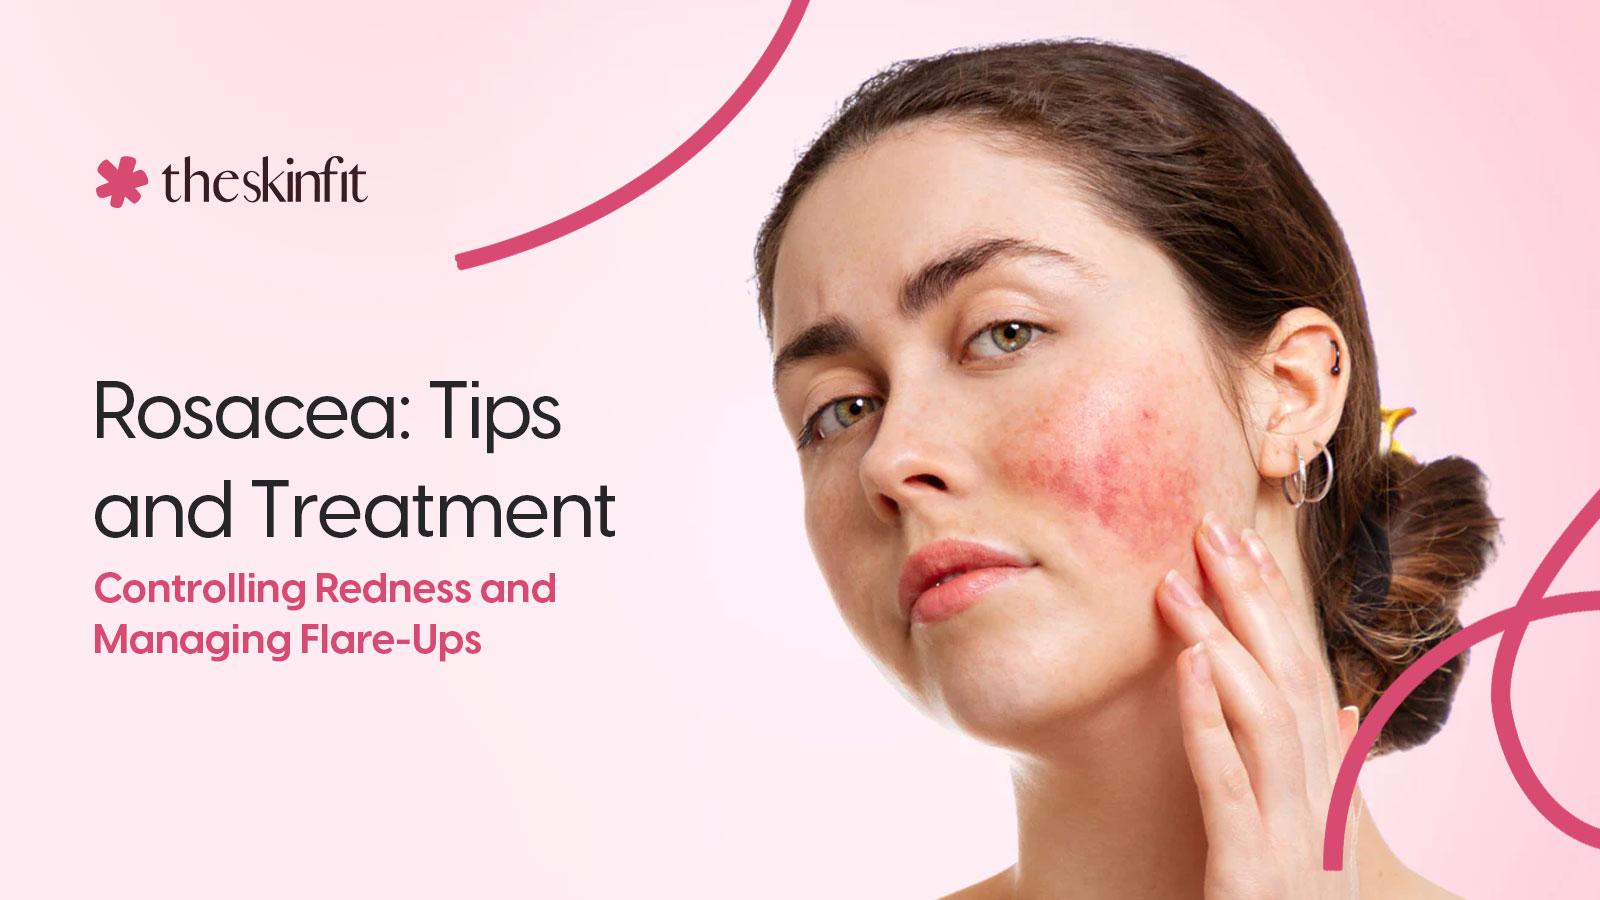 How To Treat And Manage Rosacea's Redness And Flare-Ups 